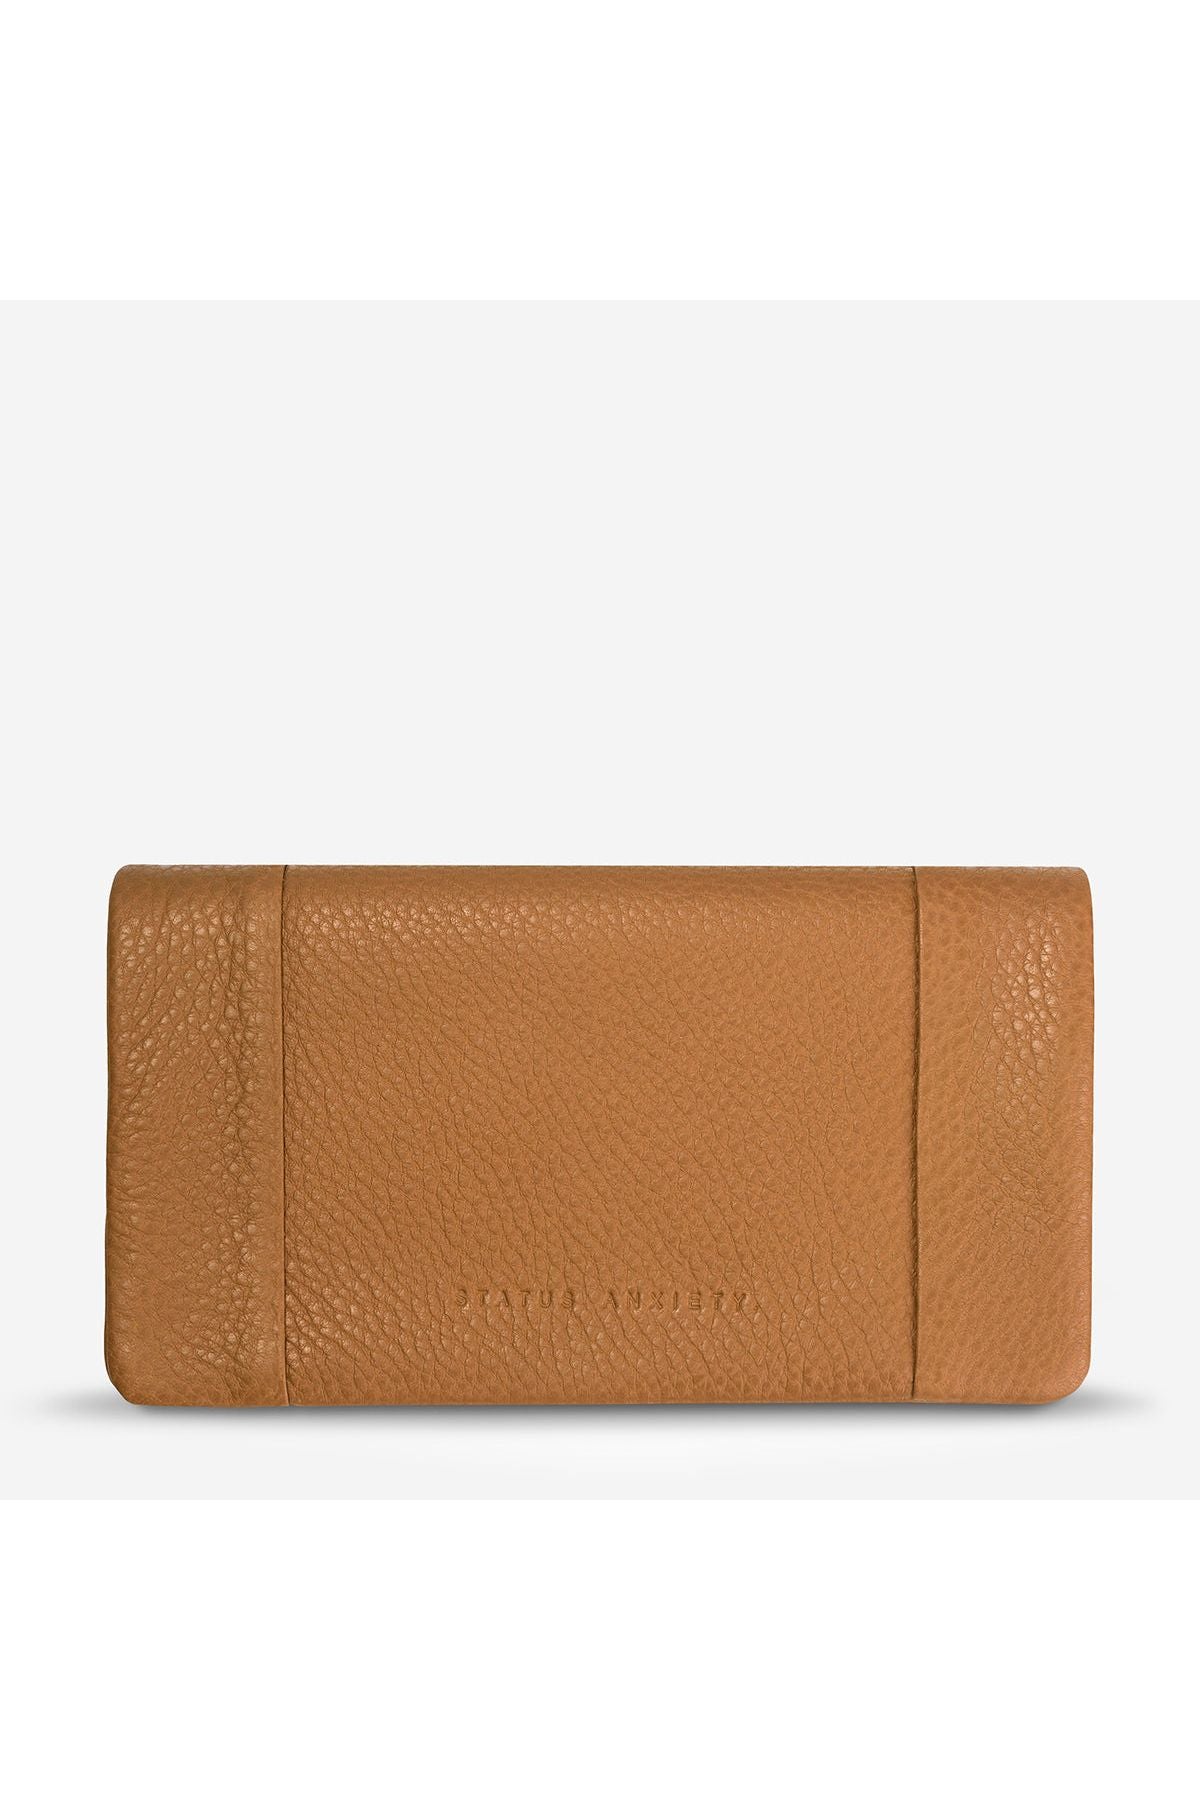 Status Anxiety - Some Type of Love Wallet - Tan